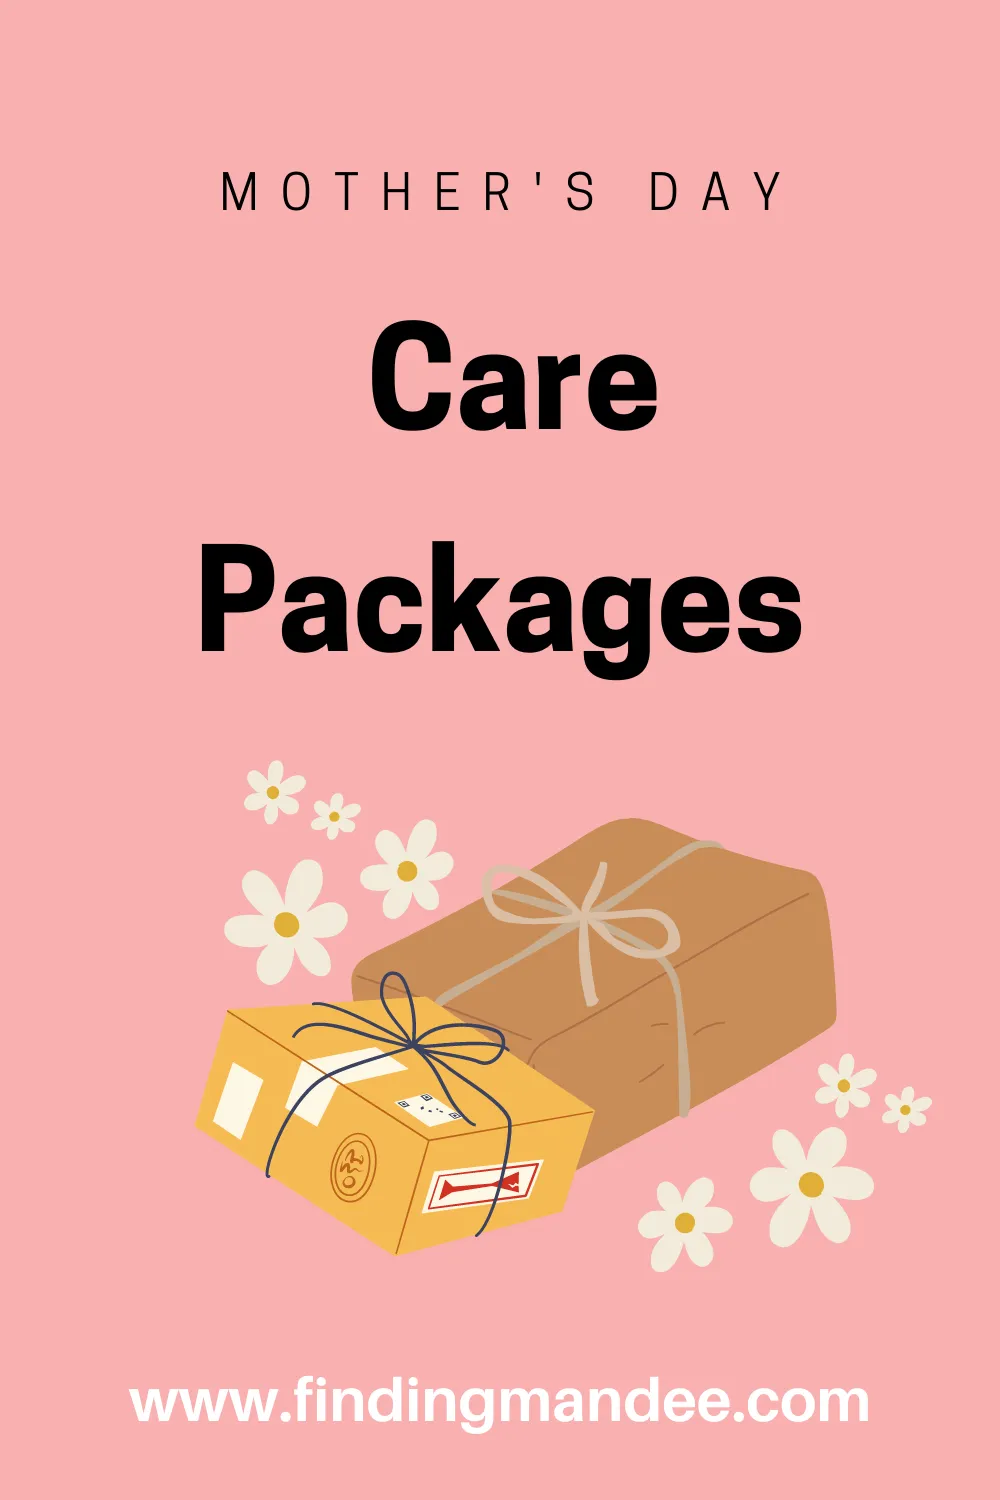 Mother's Day Care Packages: Ideas, Themes, and What to Put Inside